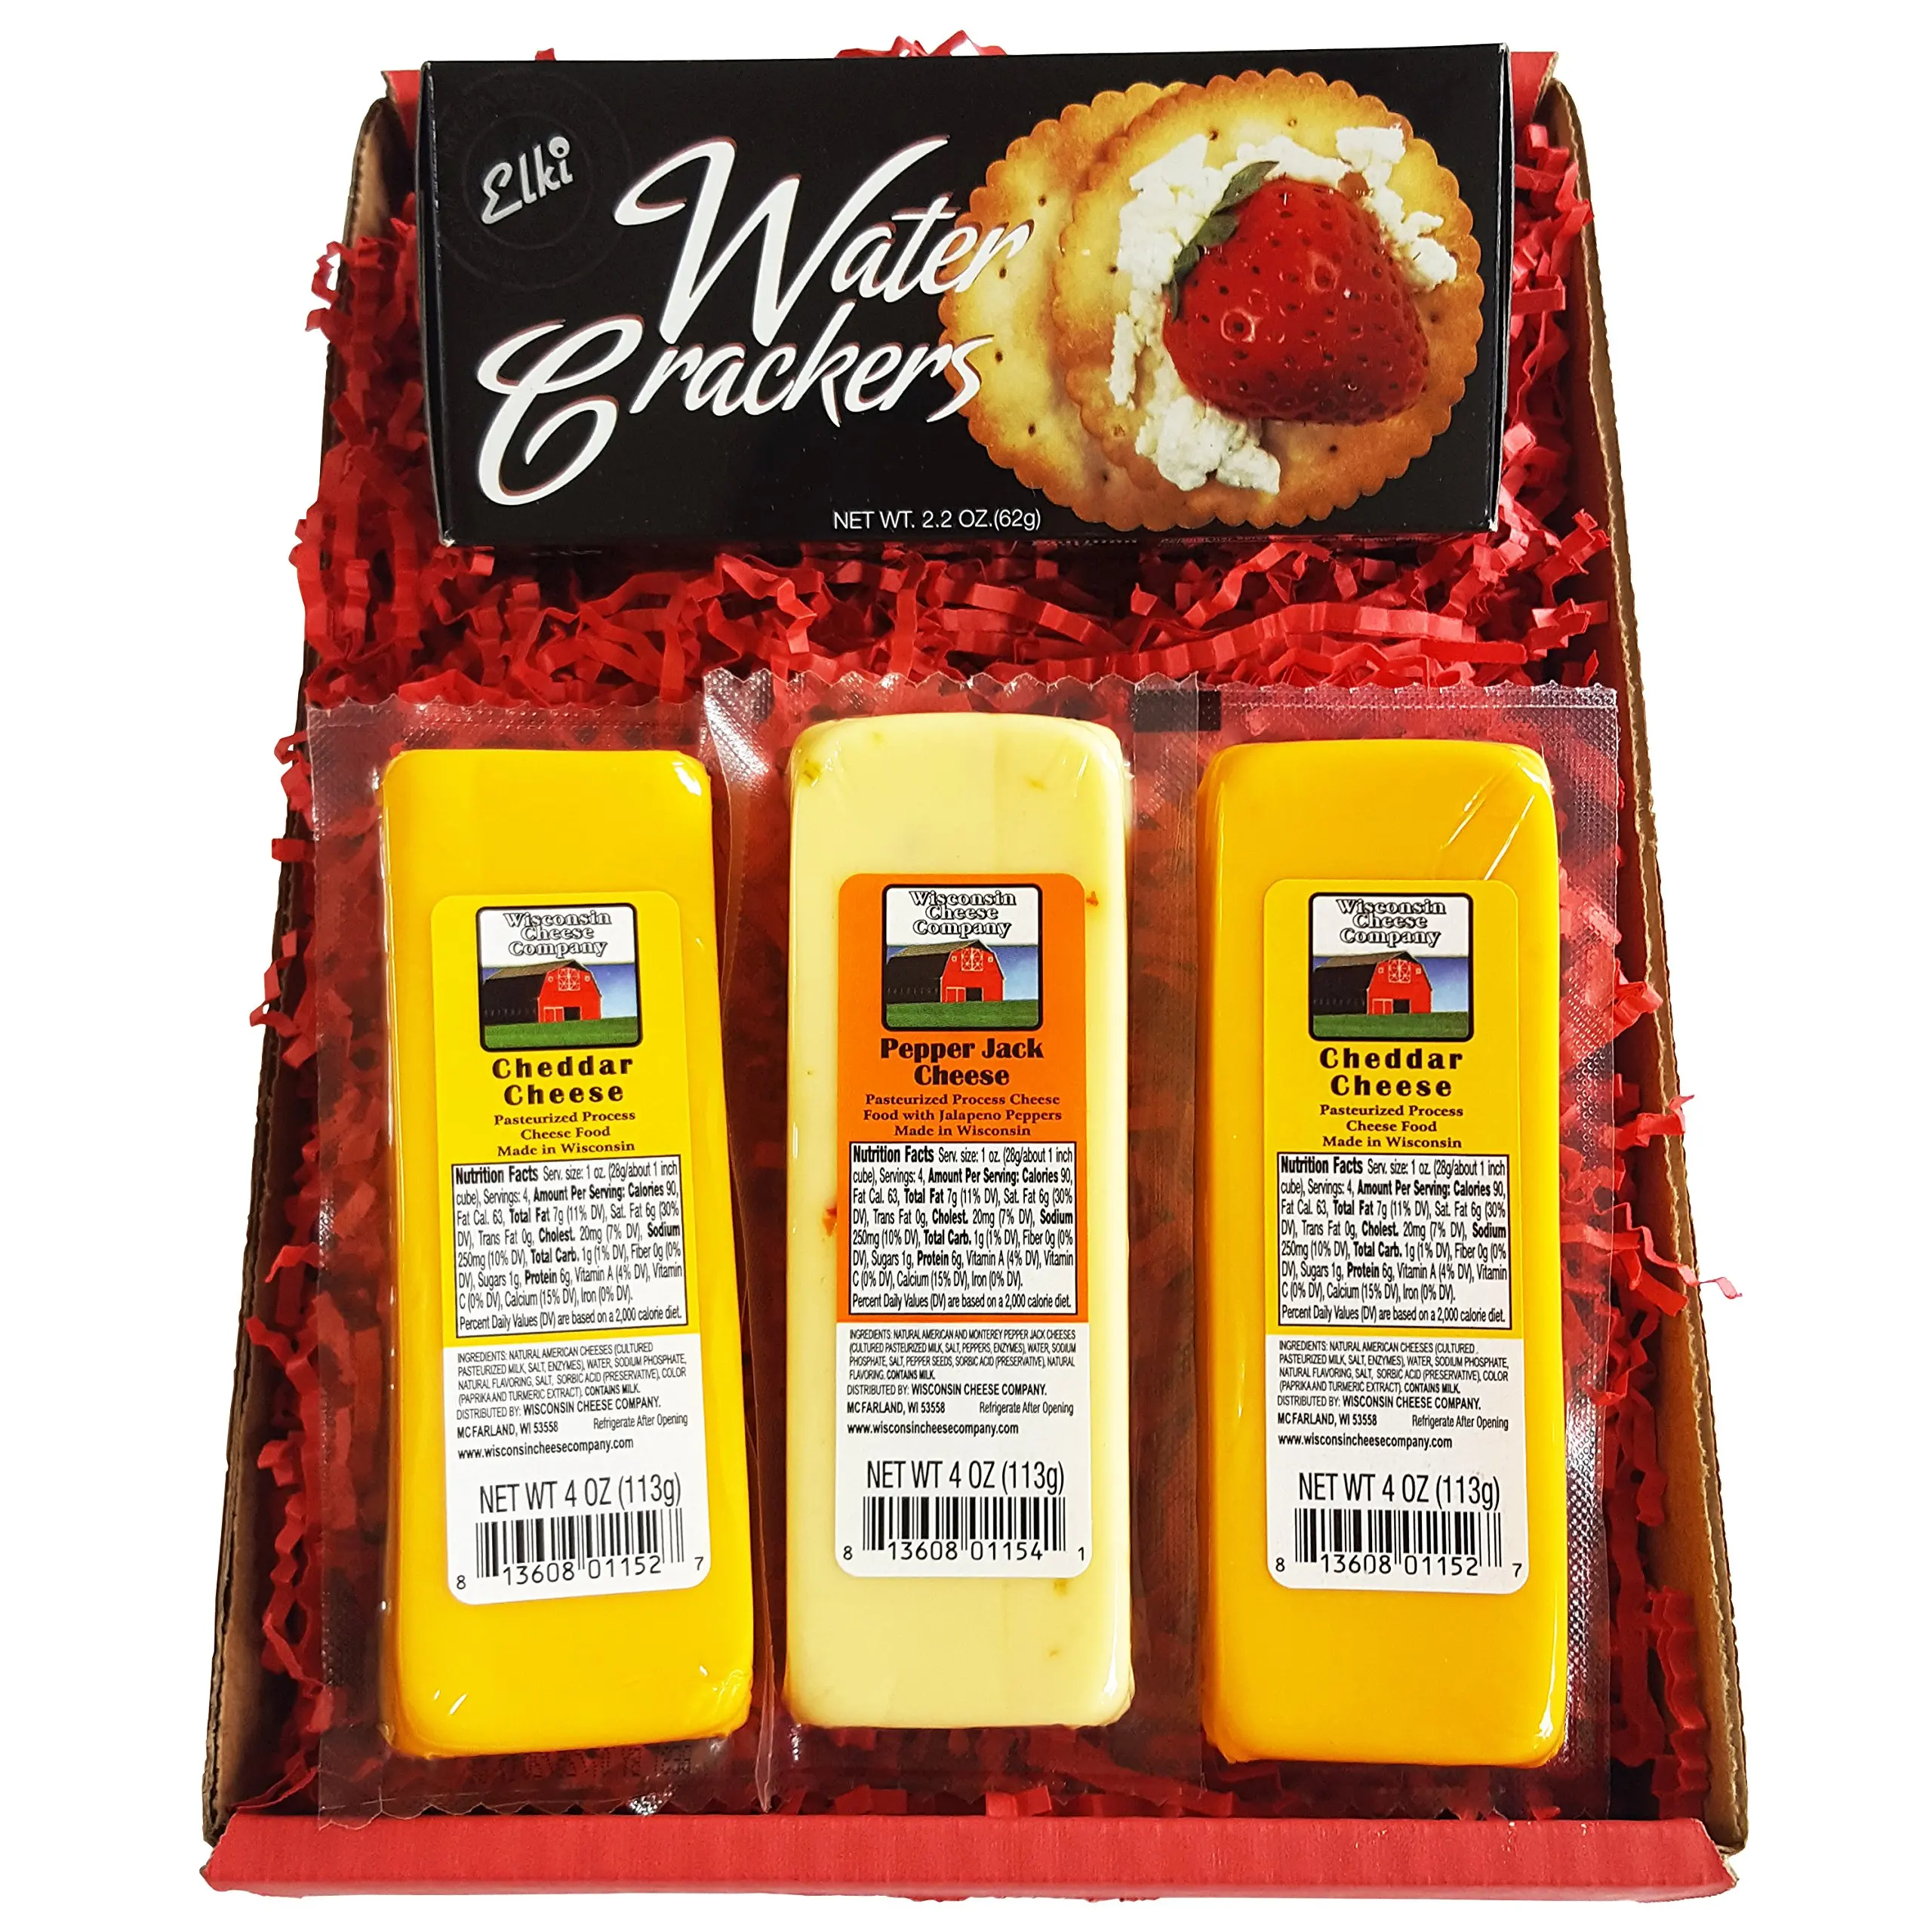 Wi products. Cheese Box сыр Чеддер. Сыр Висконсин клюква. Cheese lovers.